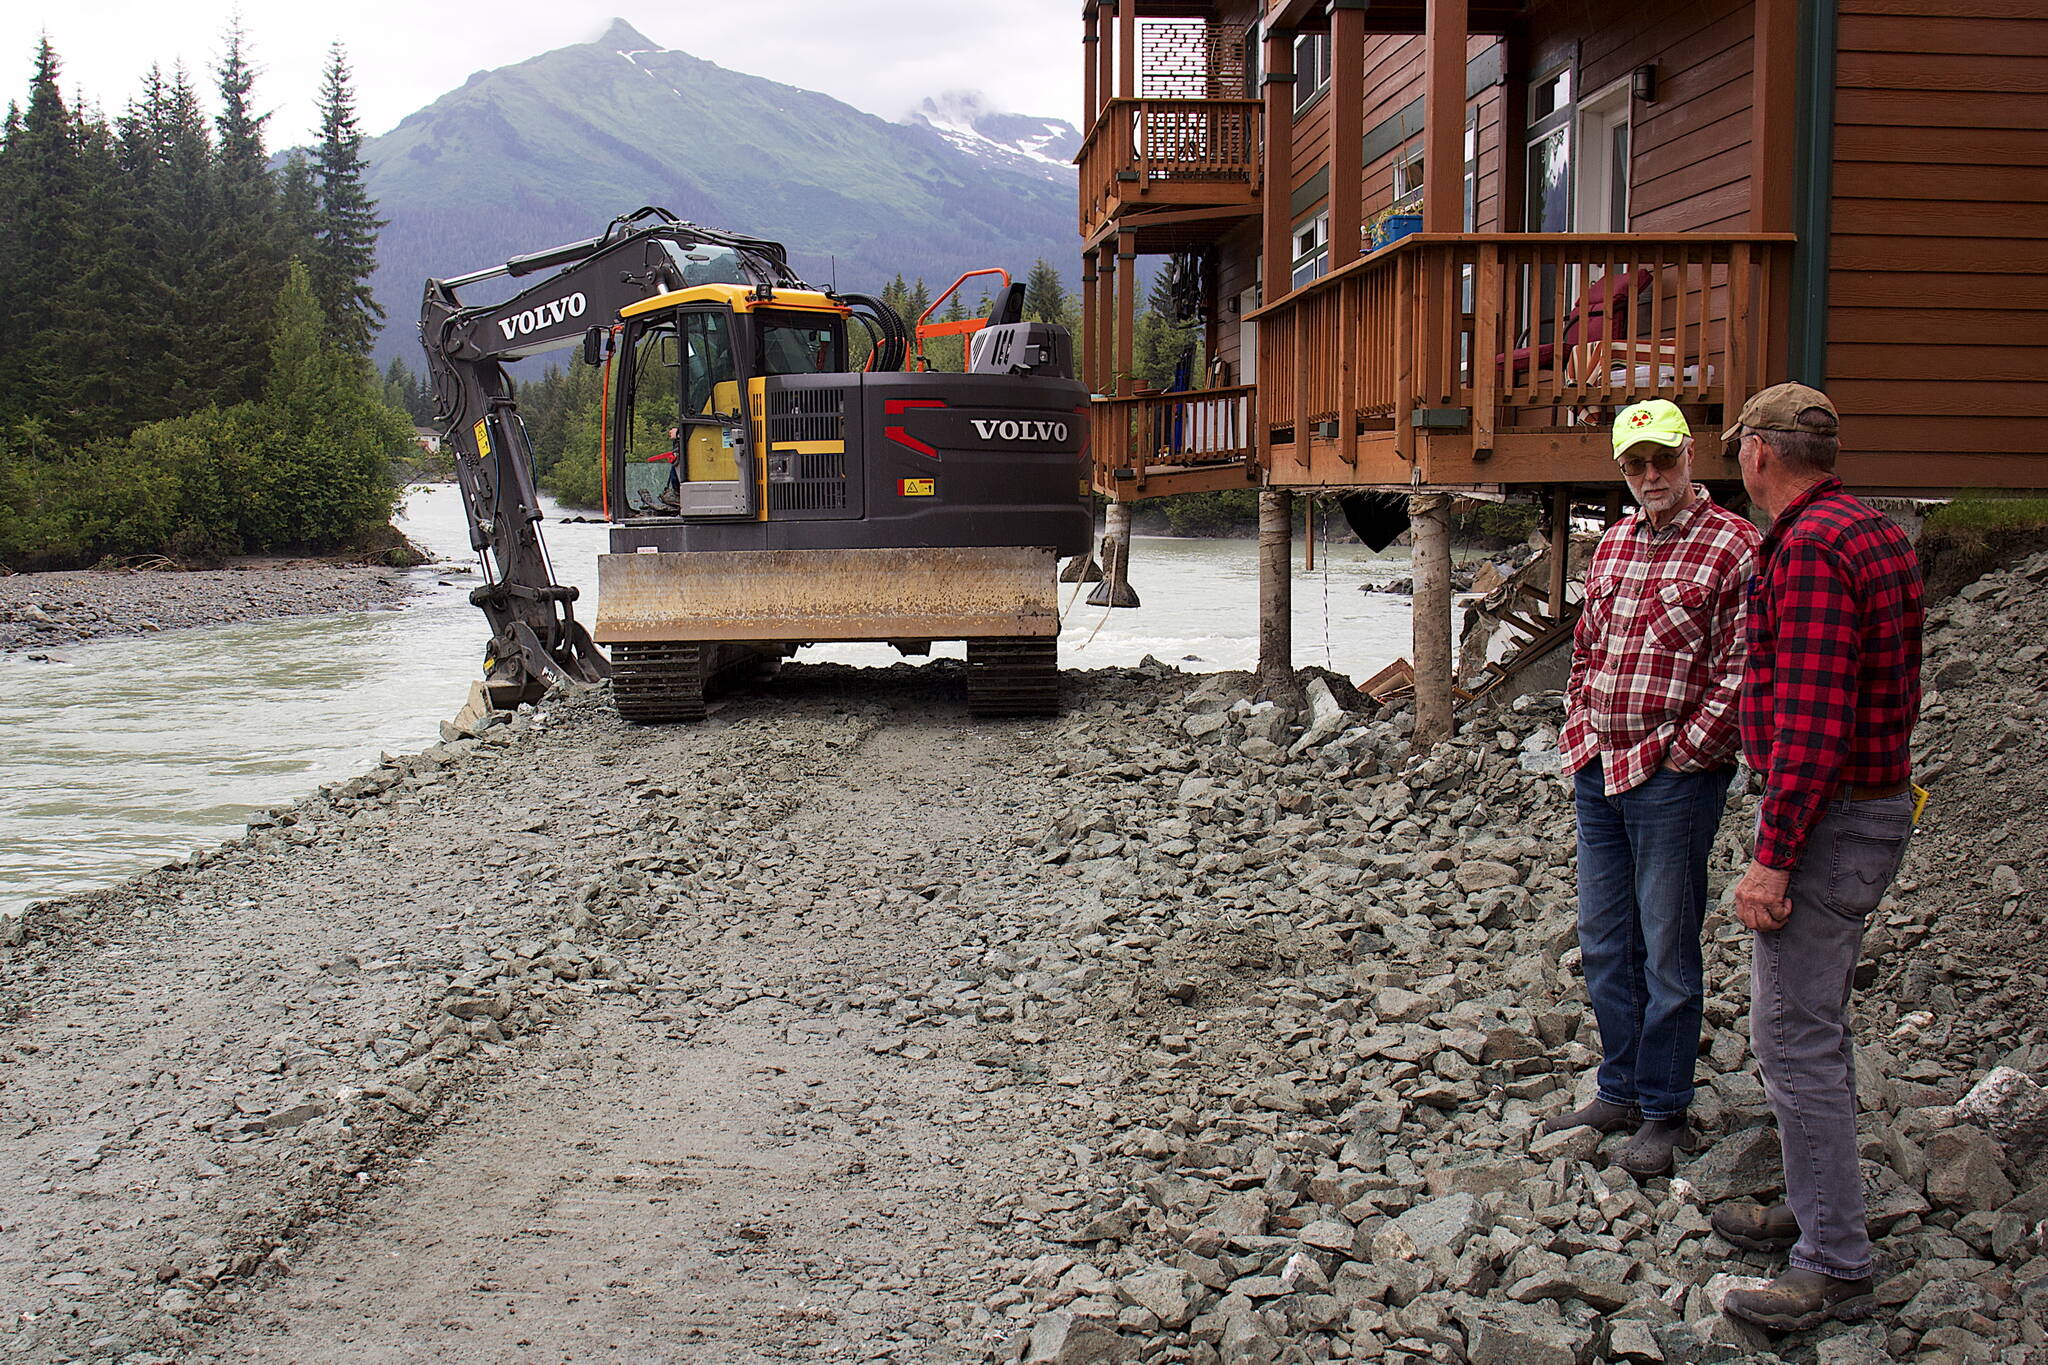 Steve Bradford (left) and Mark Kissel, both vice presidents of the Riverside Condominiums Homeowners Association, discuss repairs to two of the complex’s buildings on Wednesday as a bulldozer places rock fill under a corner of one building exposed by erosion during record flooding of the Mendenhall River last Saturday. (Mark Sabbatini / Juneau Empire)